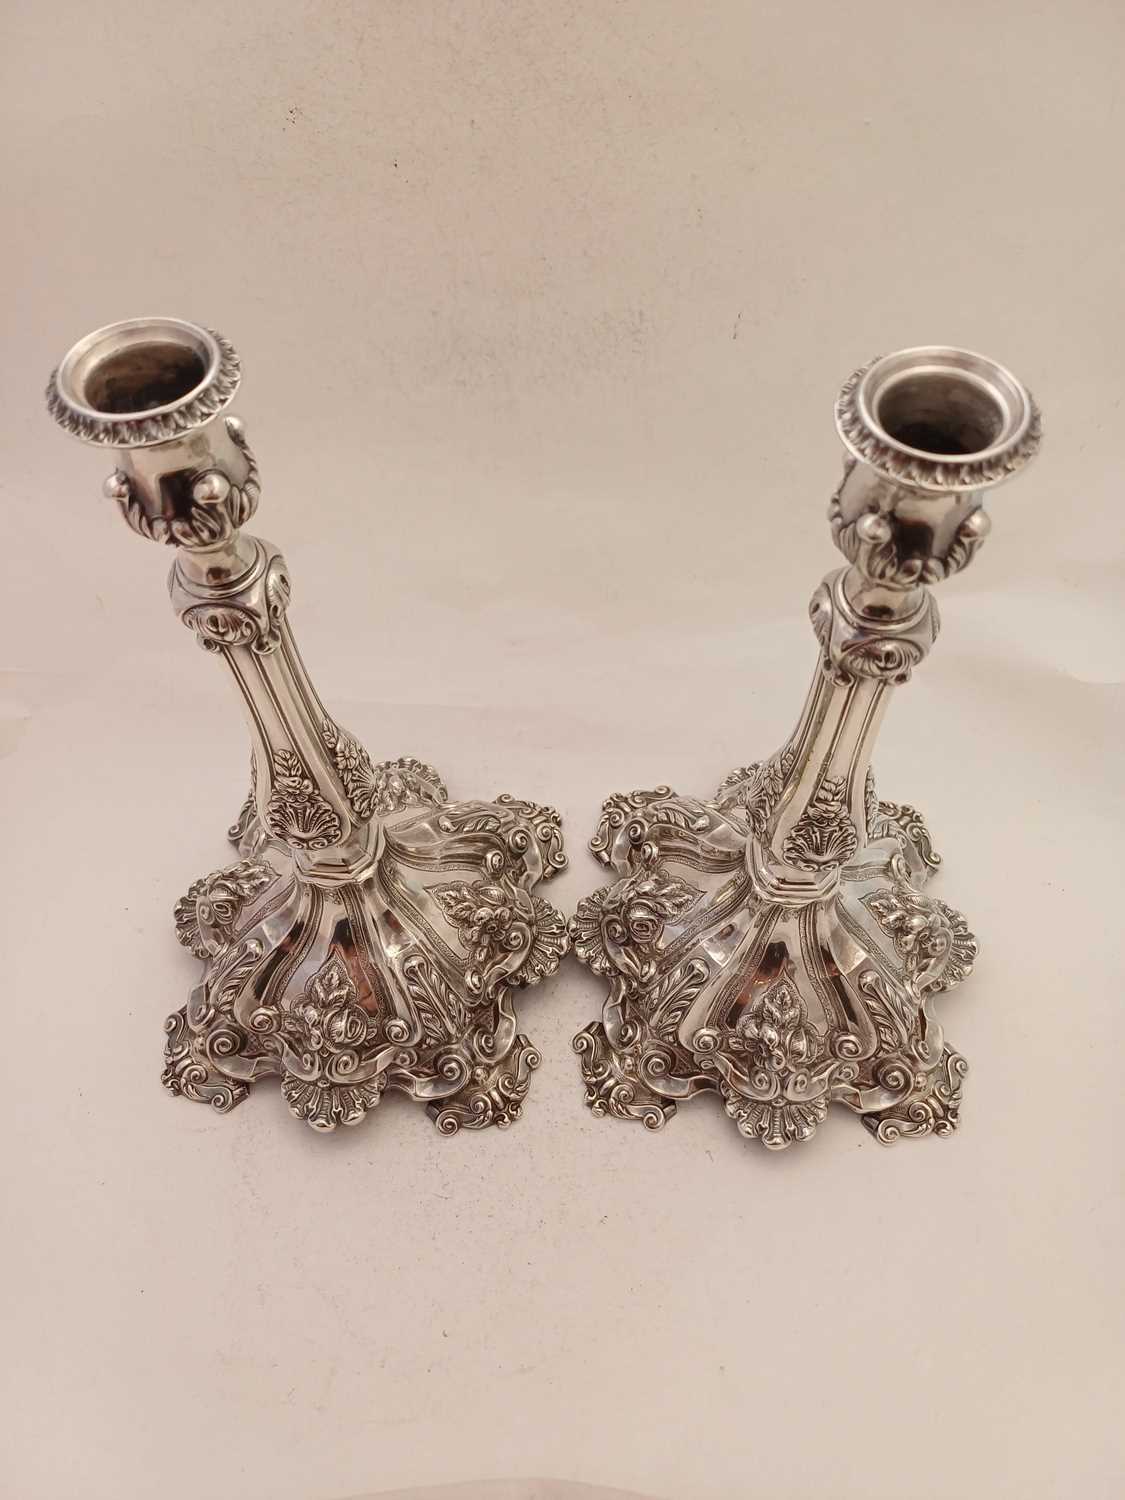 A Pair of Portuguese Silver Five-Light Candelabra, by Topázio, Second Quarter 20th Century - Image 7 of 10